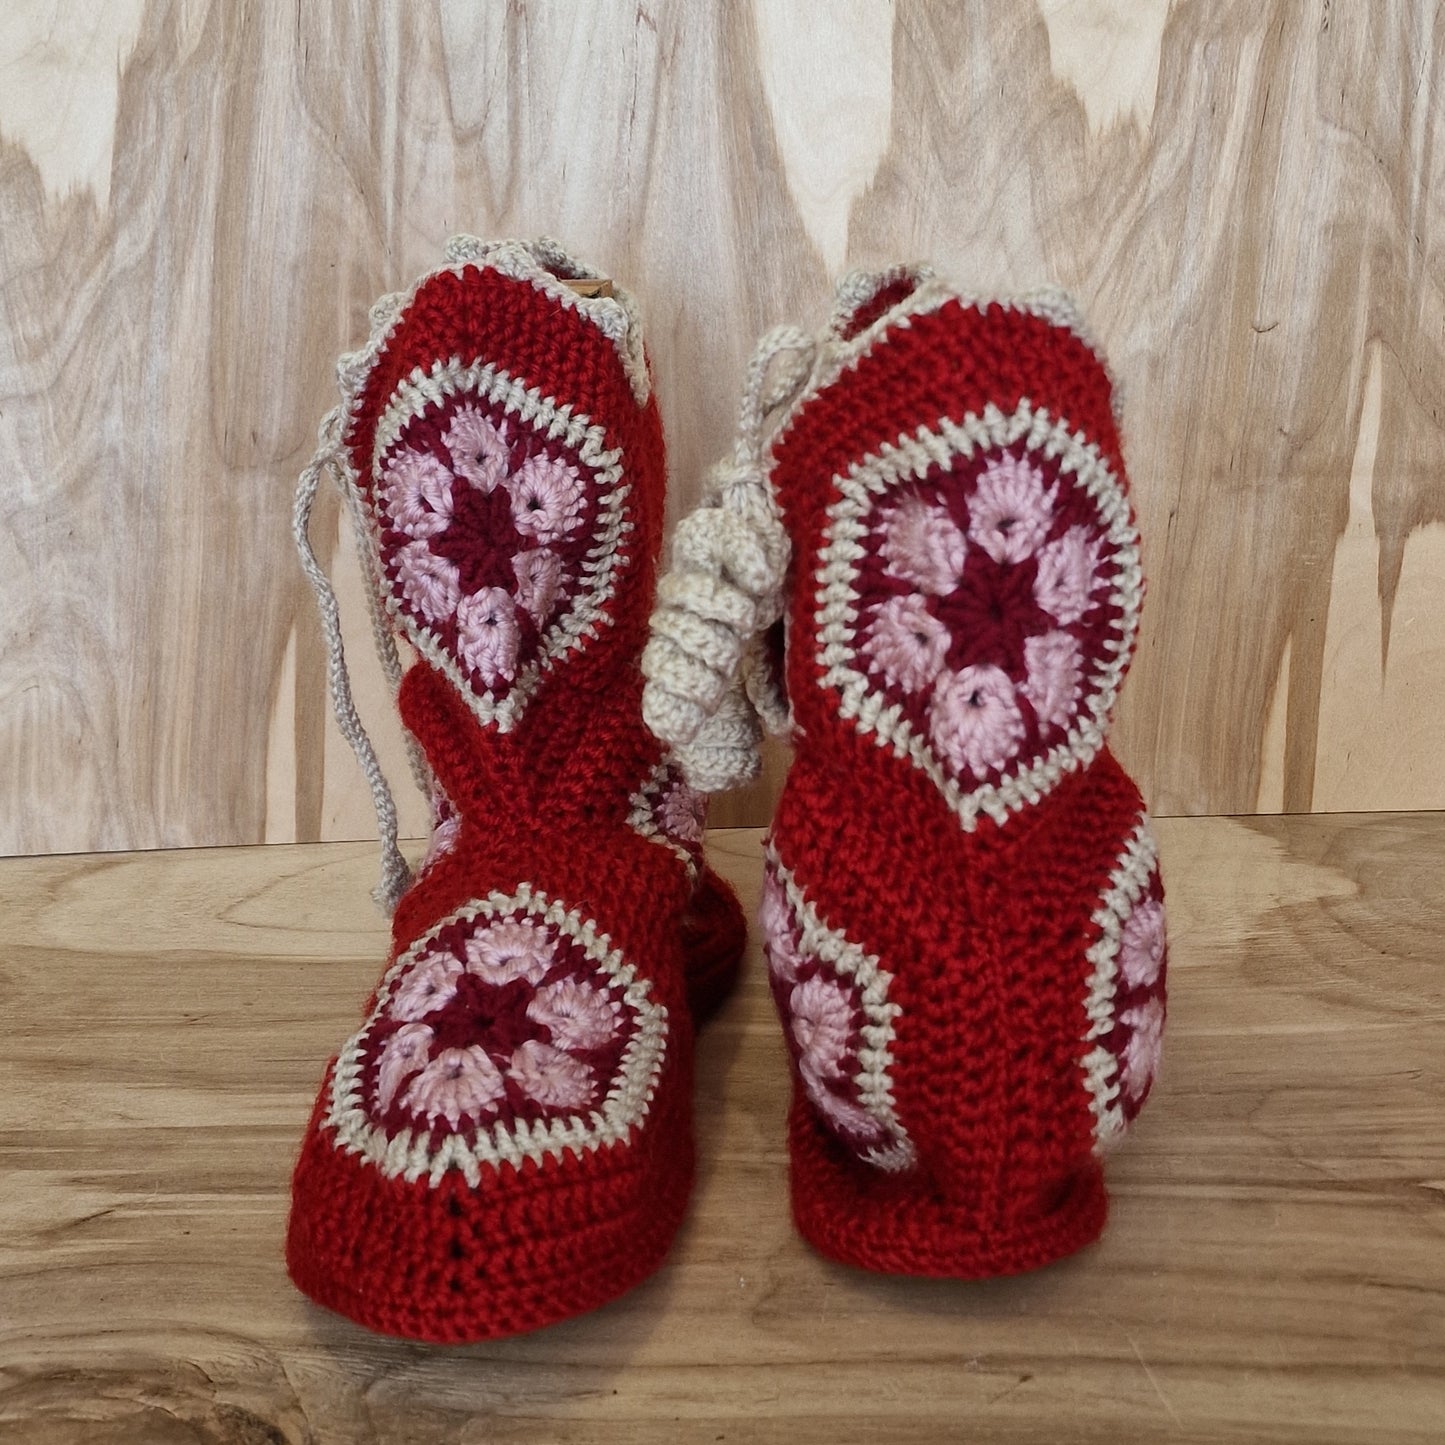 Hand crocheted booties/slippers size 39-40. in red-pink shades (ME 3)